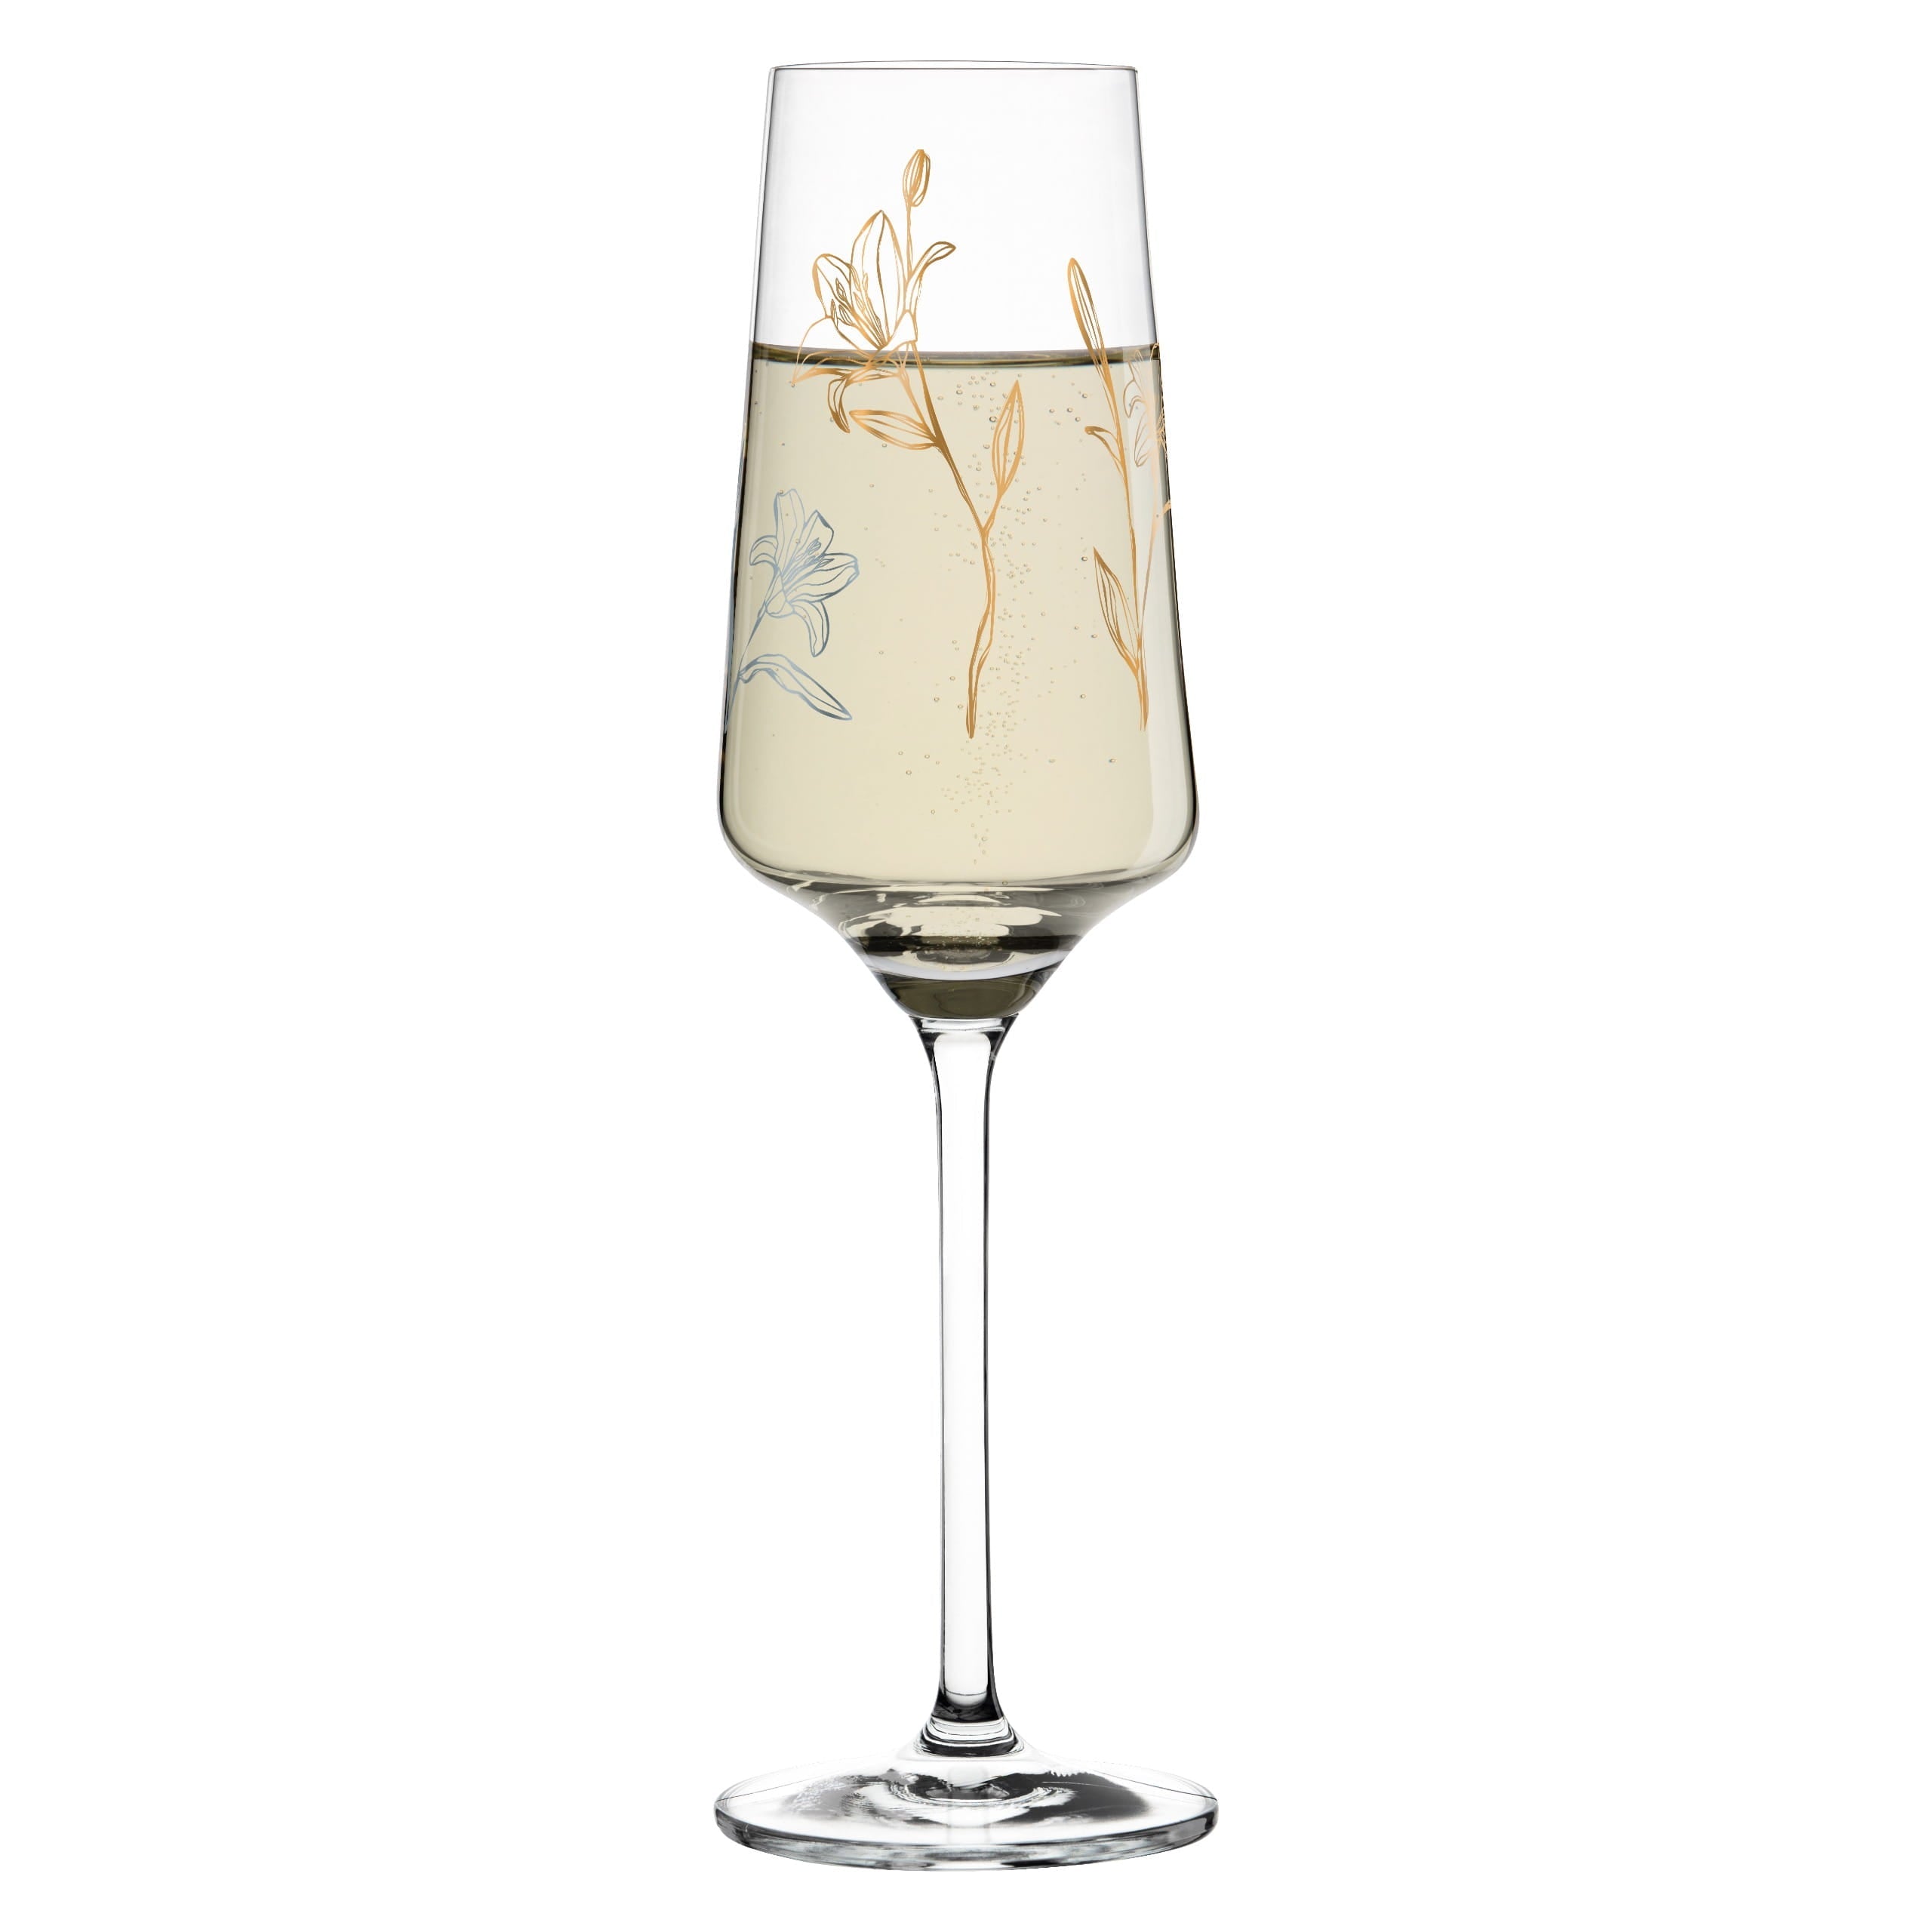 GLASS FOR PROSECCO LILIES